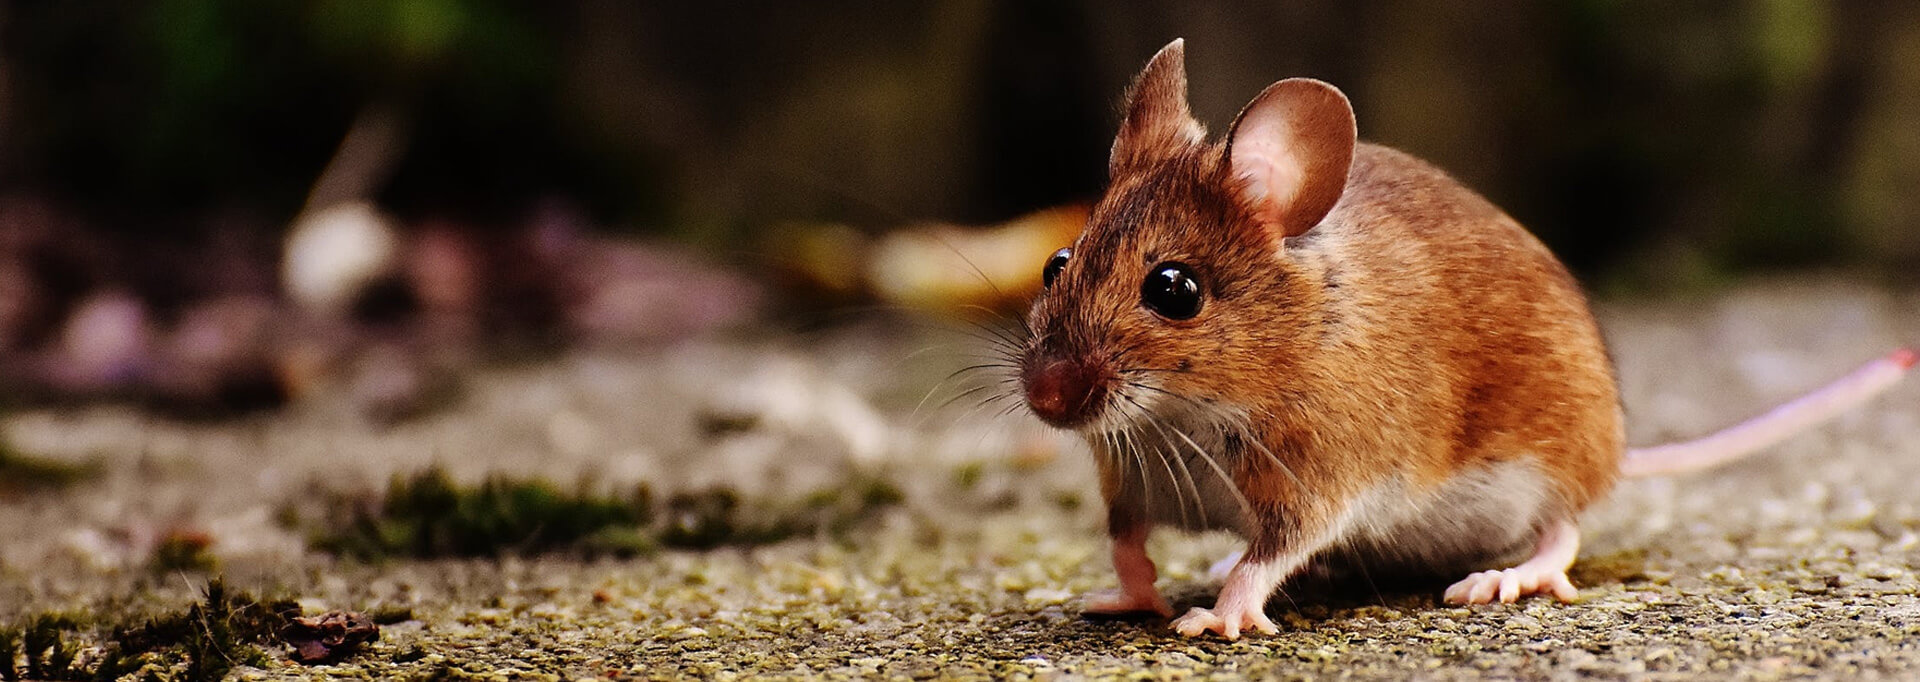 A mouse that is standing up on the ground.